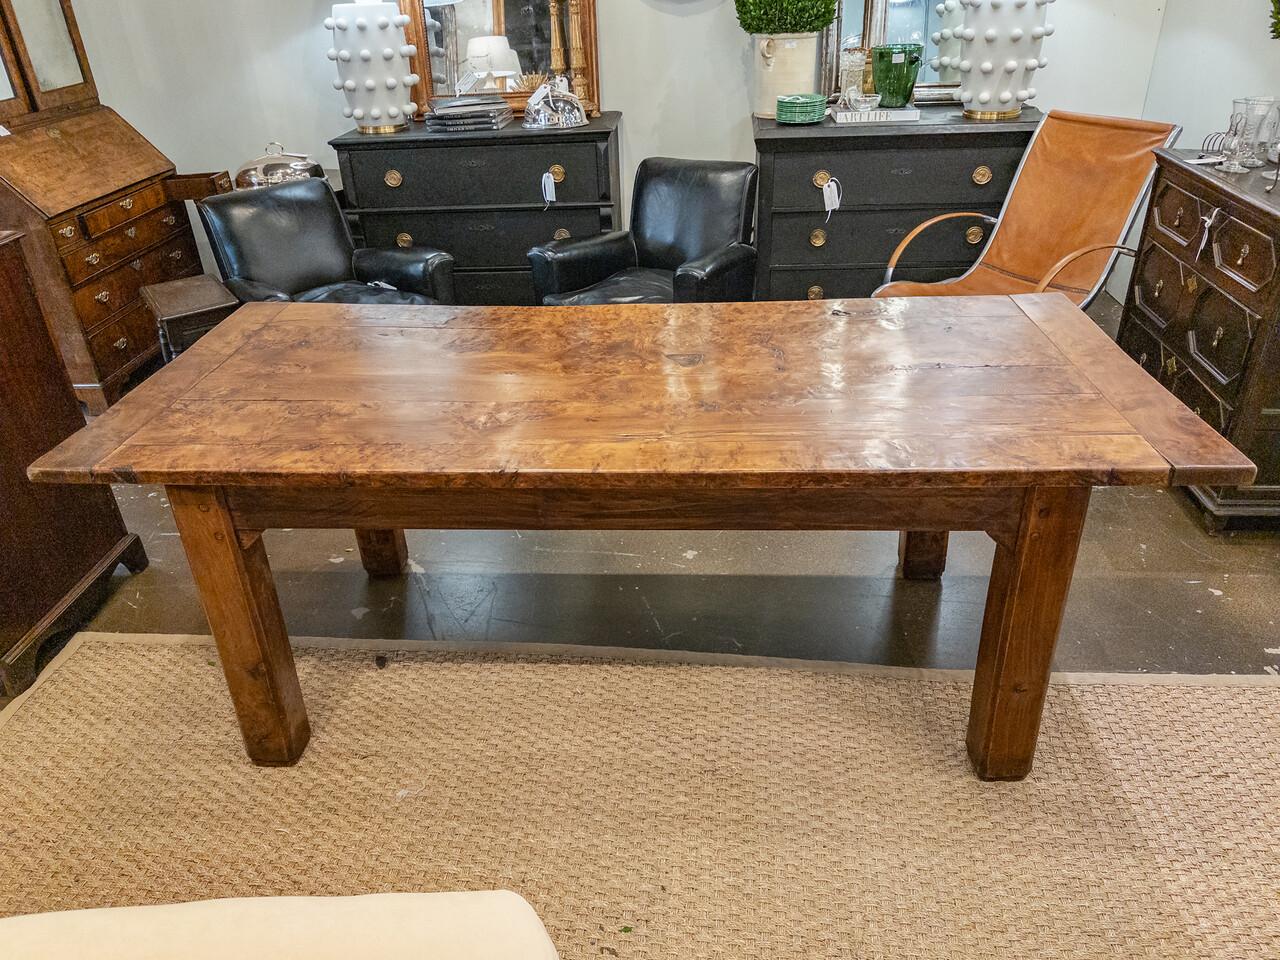 Transport yourself to the rustic elegance of 19th-century France with this exquisite French farm dining table. Crafted from rich burl walnut, this table exudes timeless charm and warmth. Its sturdy construction speaks of the artisanal craftsmanship